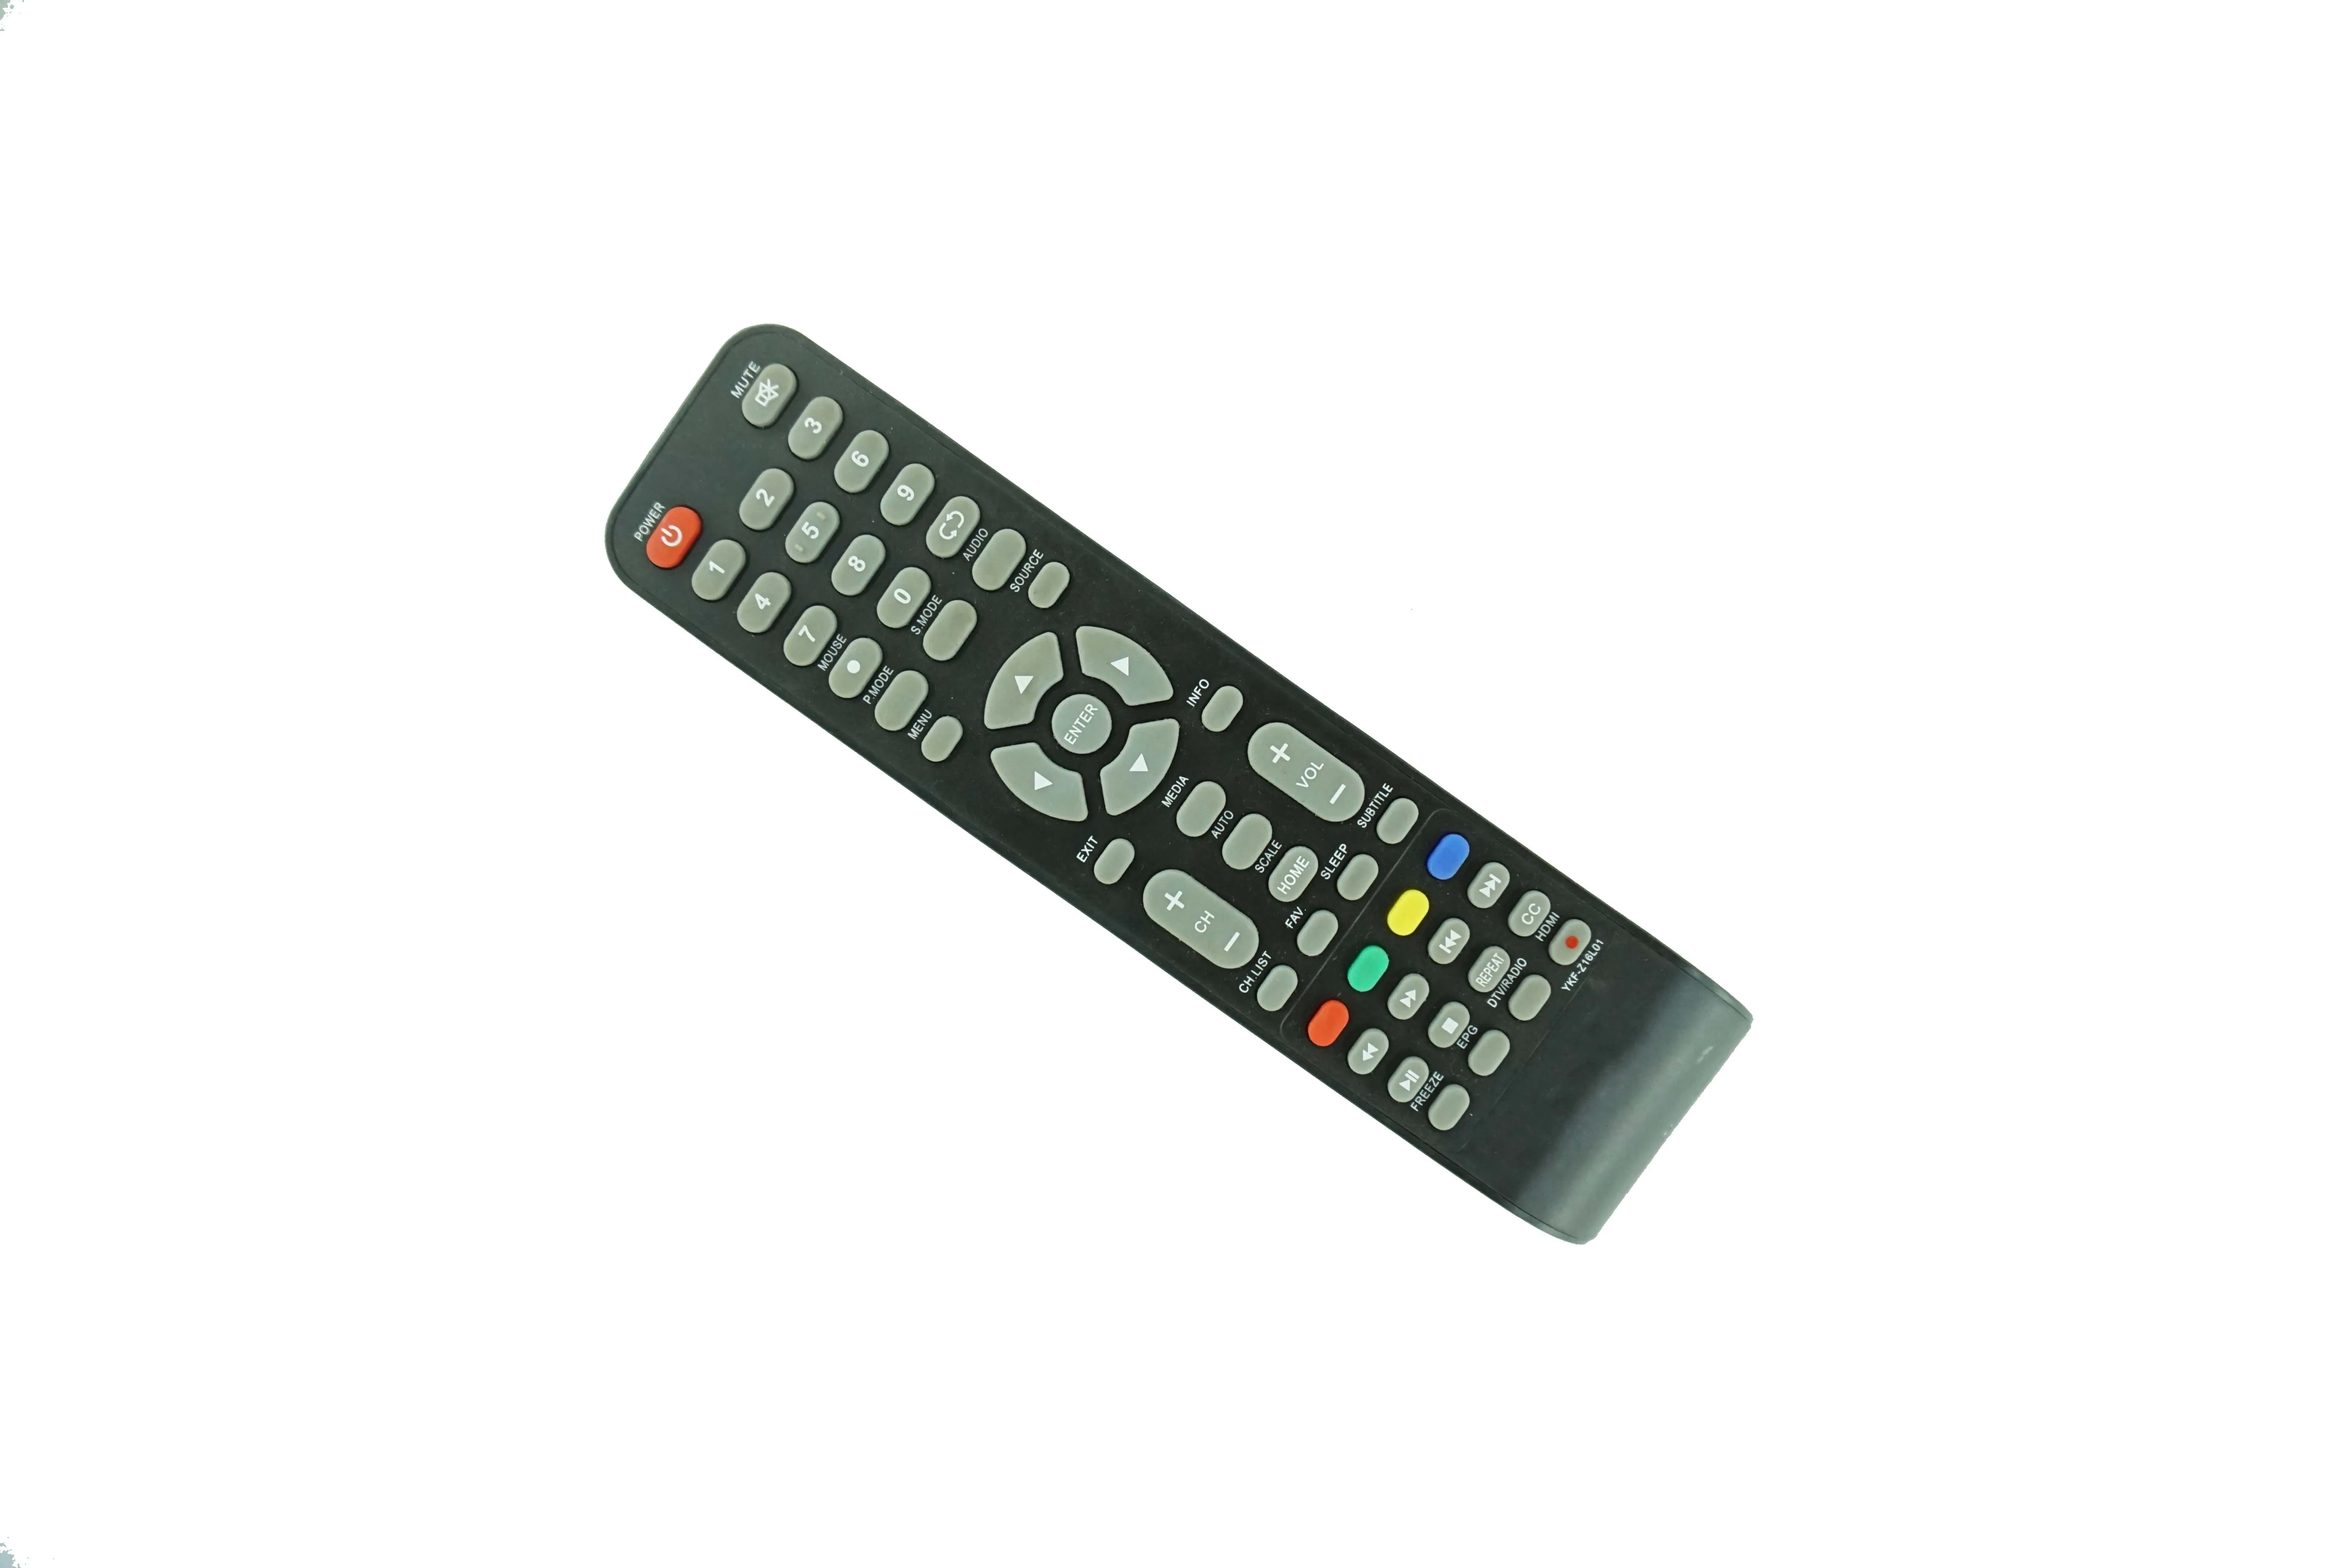 Remote Control For Nesons 2200-EDR0NESN 40PF530 43PF515S 32PF515S 50PF537S 43PU615S 43PF530 24PR545S 32PR545S 32PR615S UHD LED Smart LCD HDTV TV TELEVISION